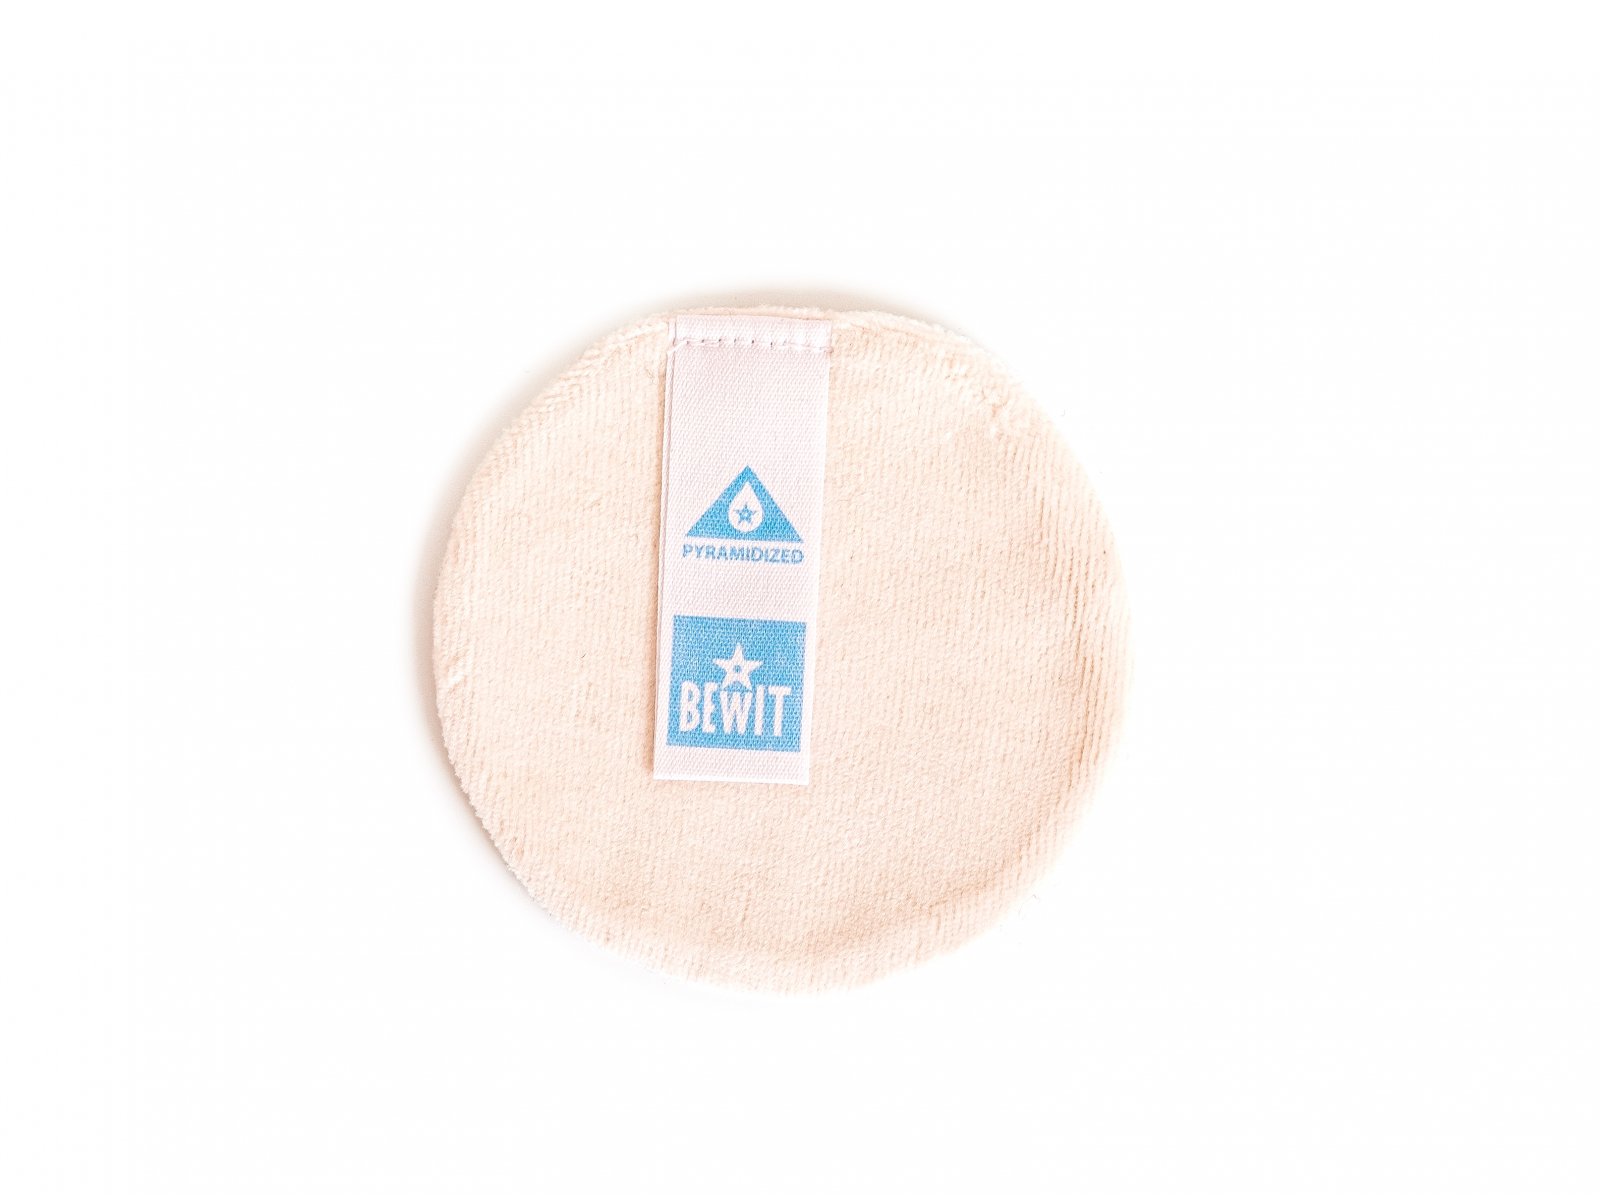 Bewit Face Cloth Luxurious - BIO-CELLULAR Exfoliating and cleansing face cloth with loop - 1